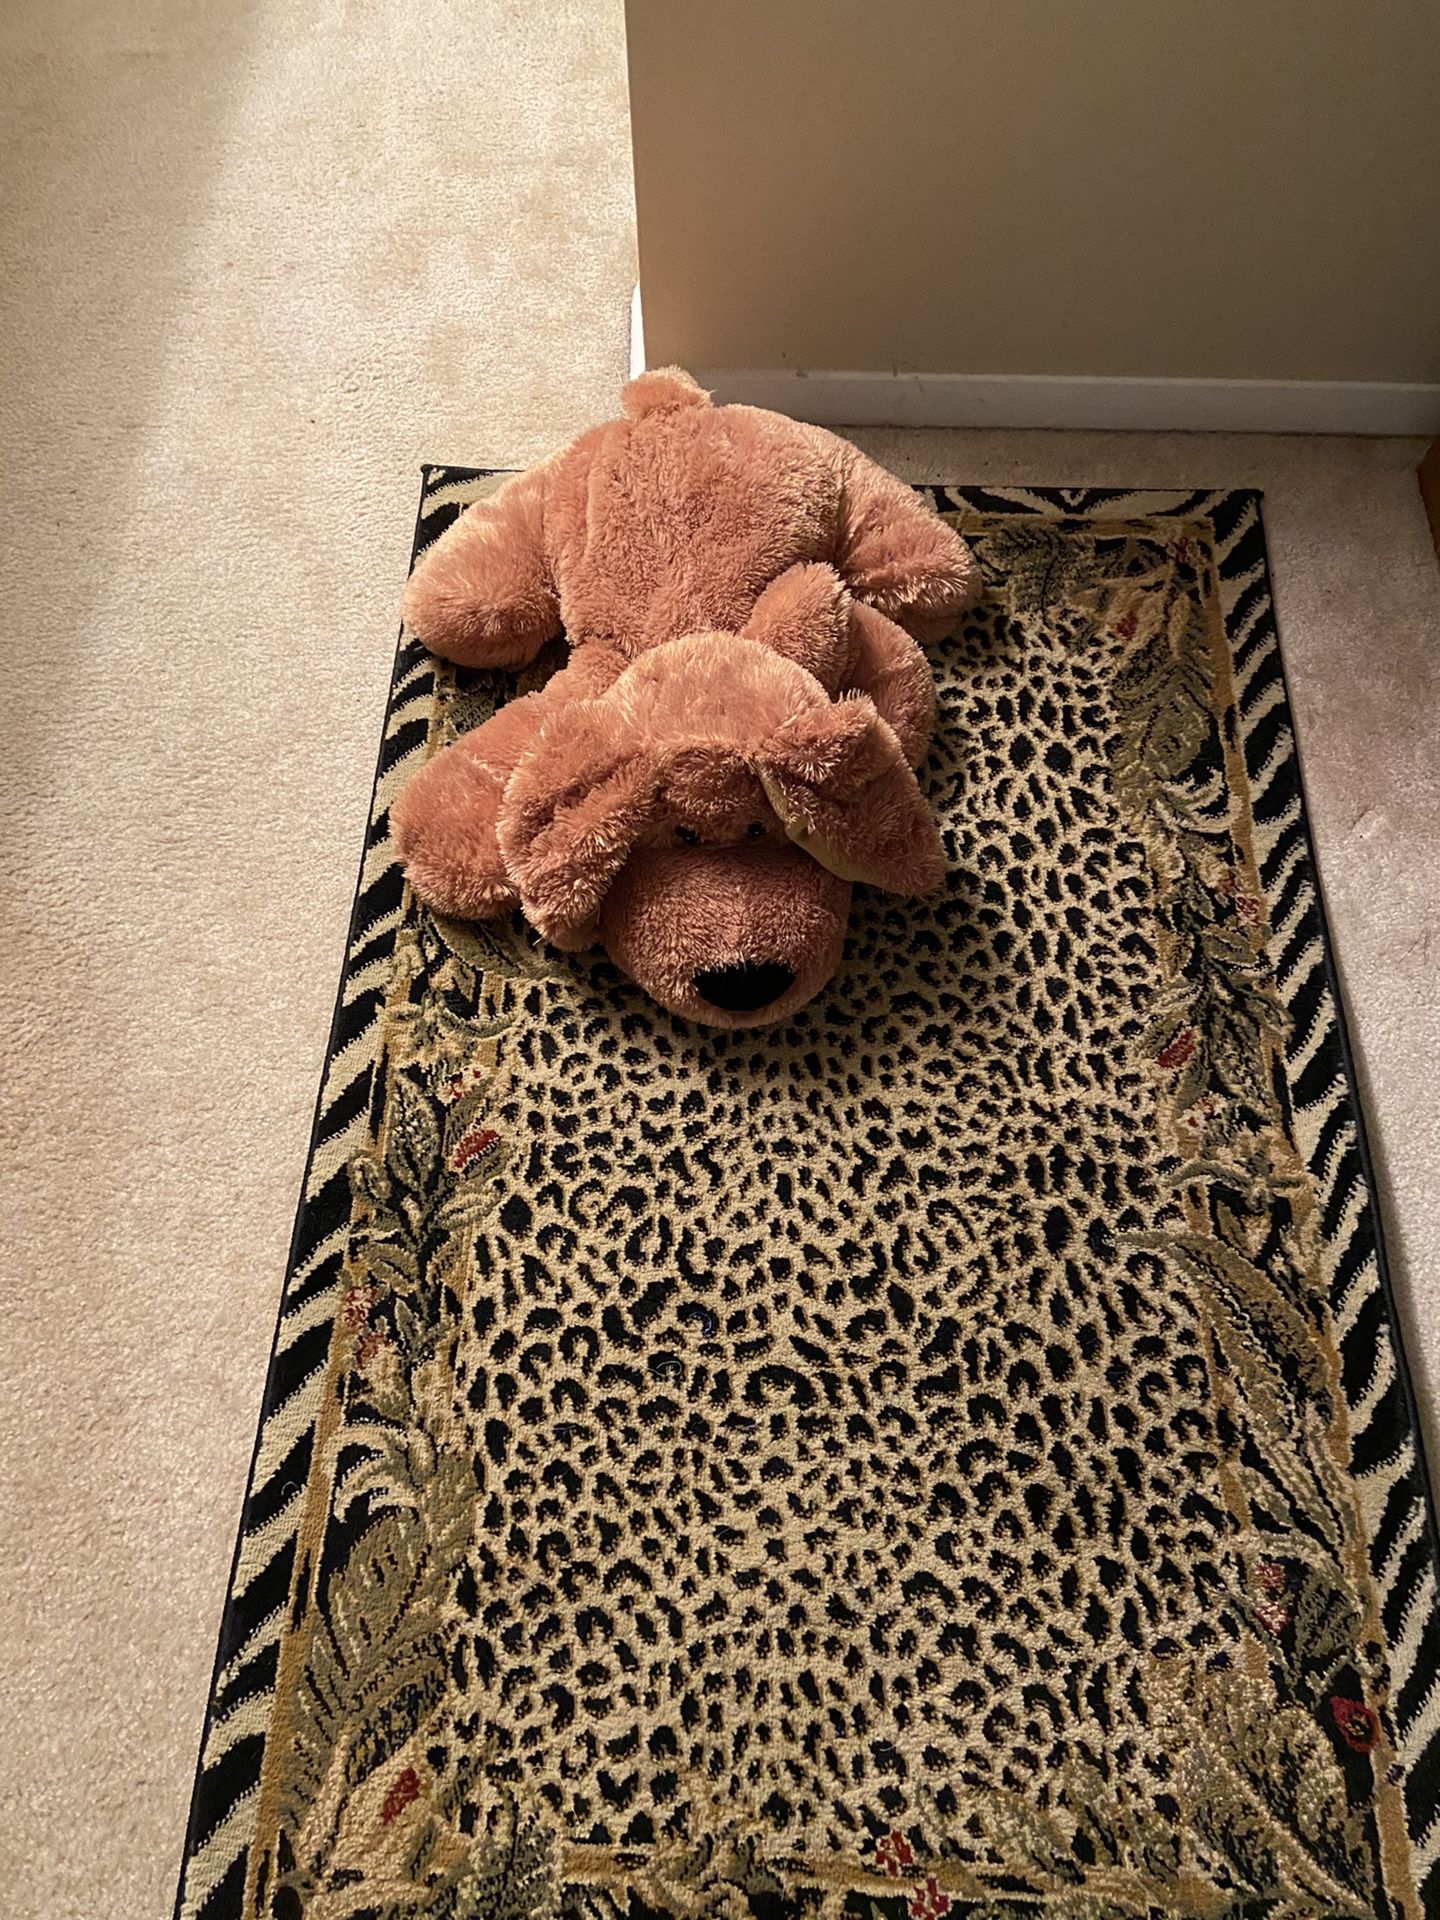 Plushy and rug for sale